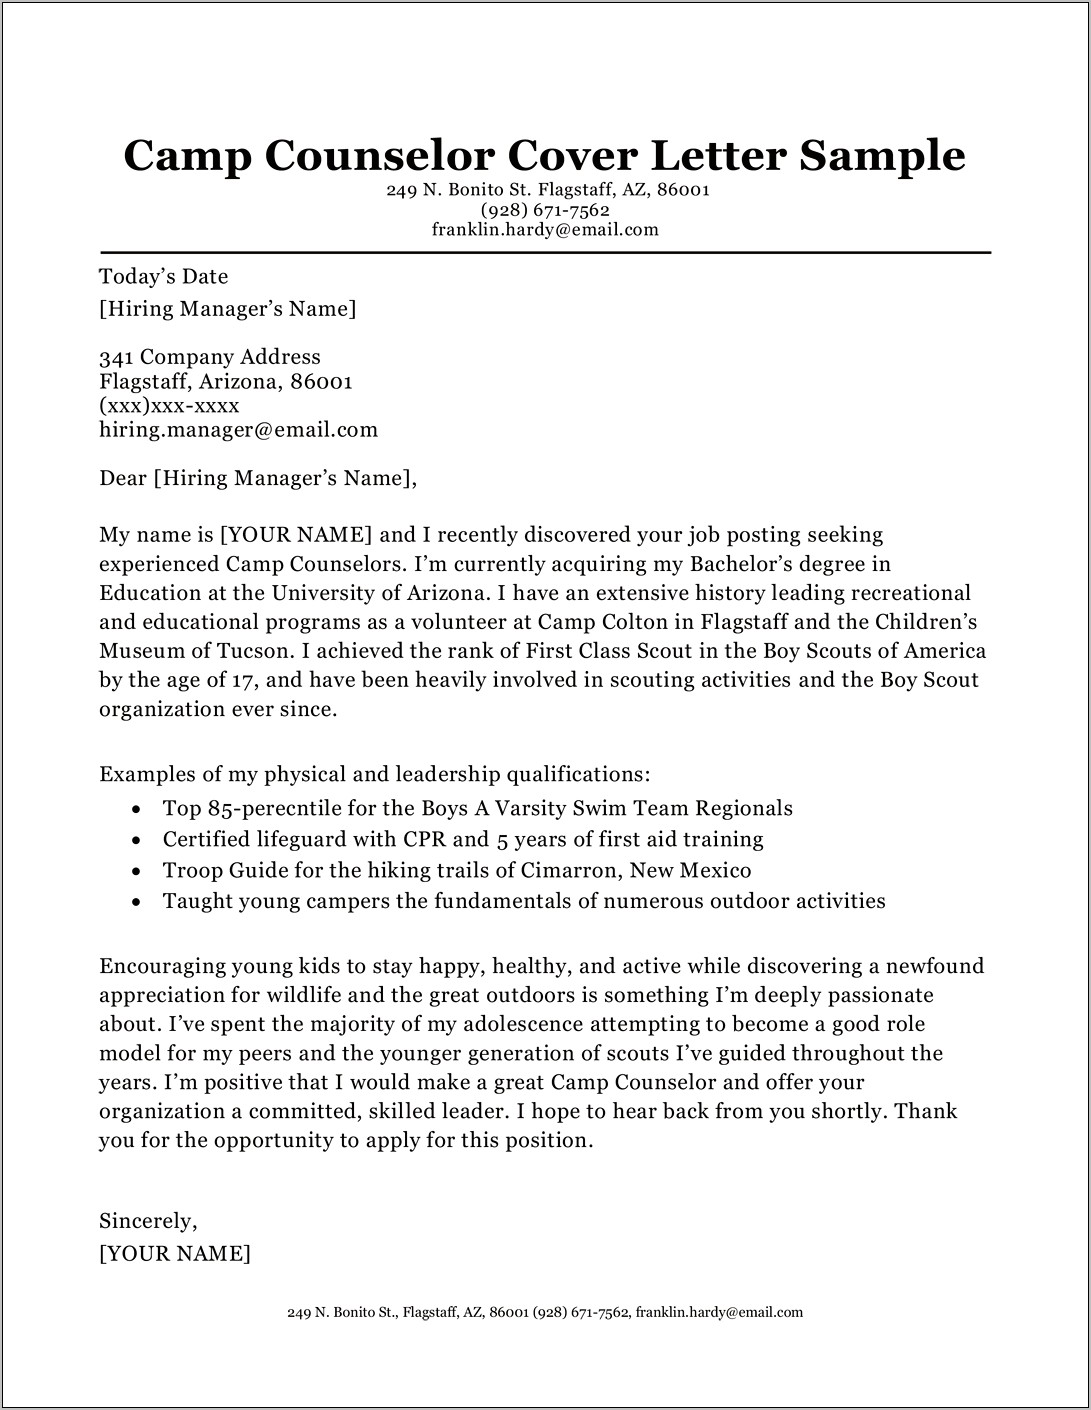 Camp Counselor Jobs On Resume